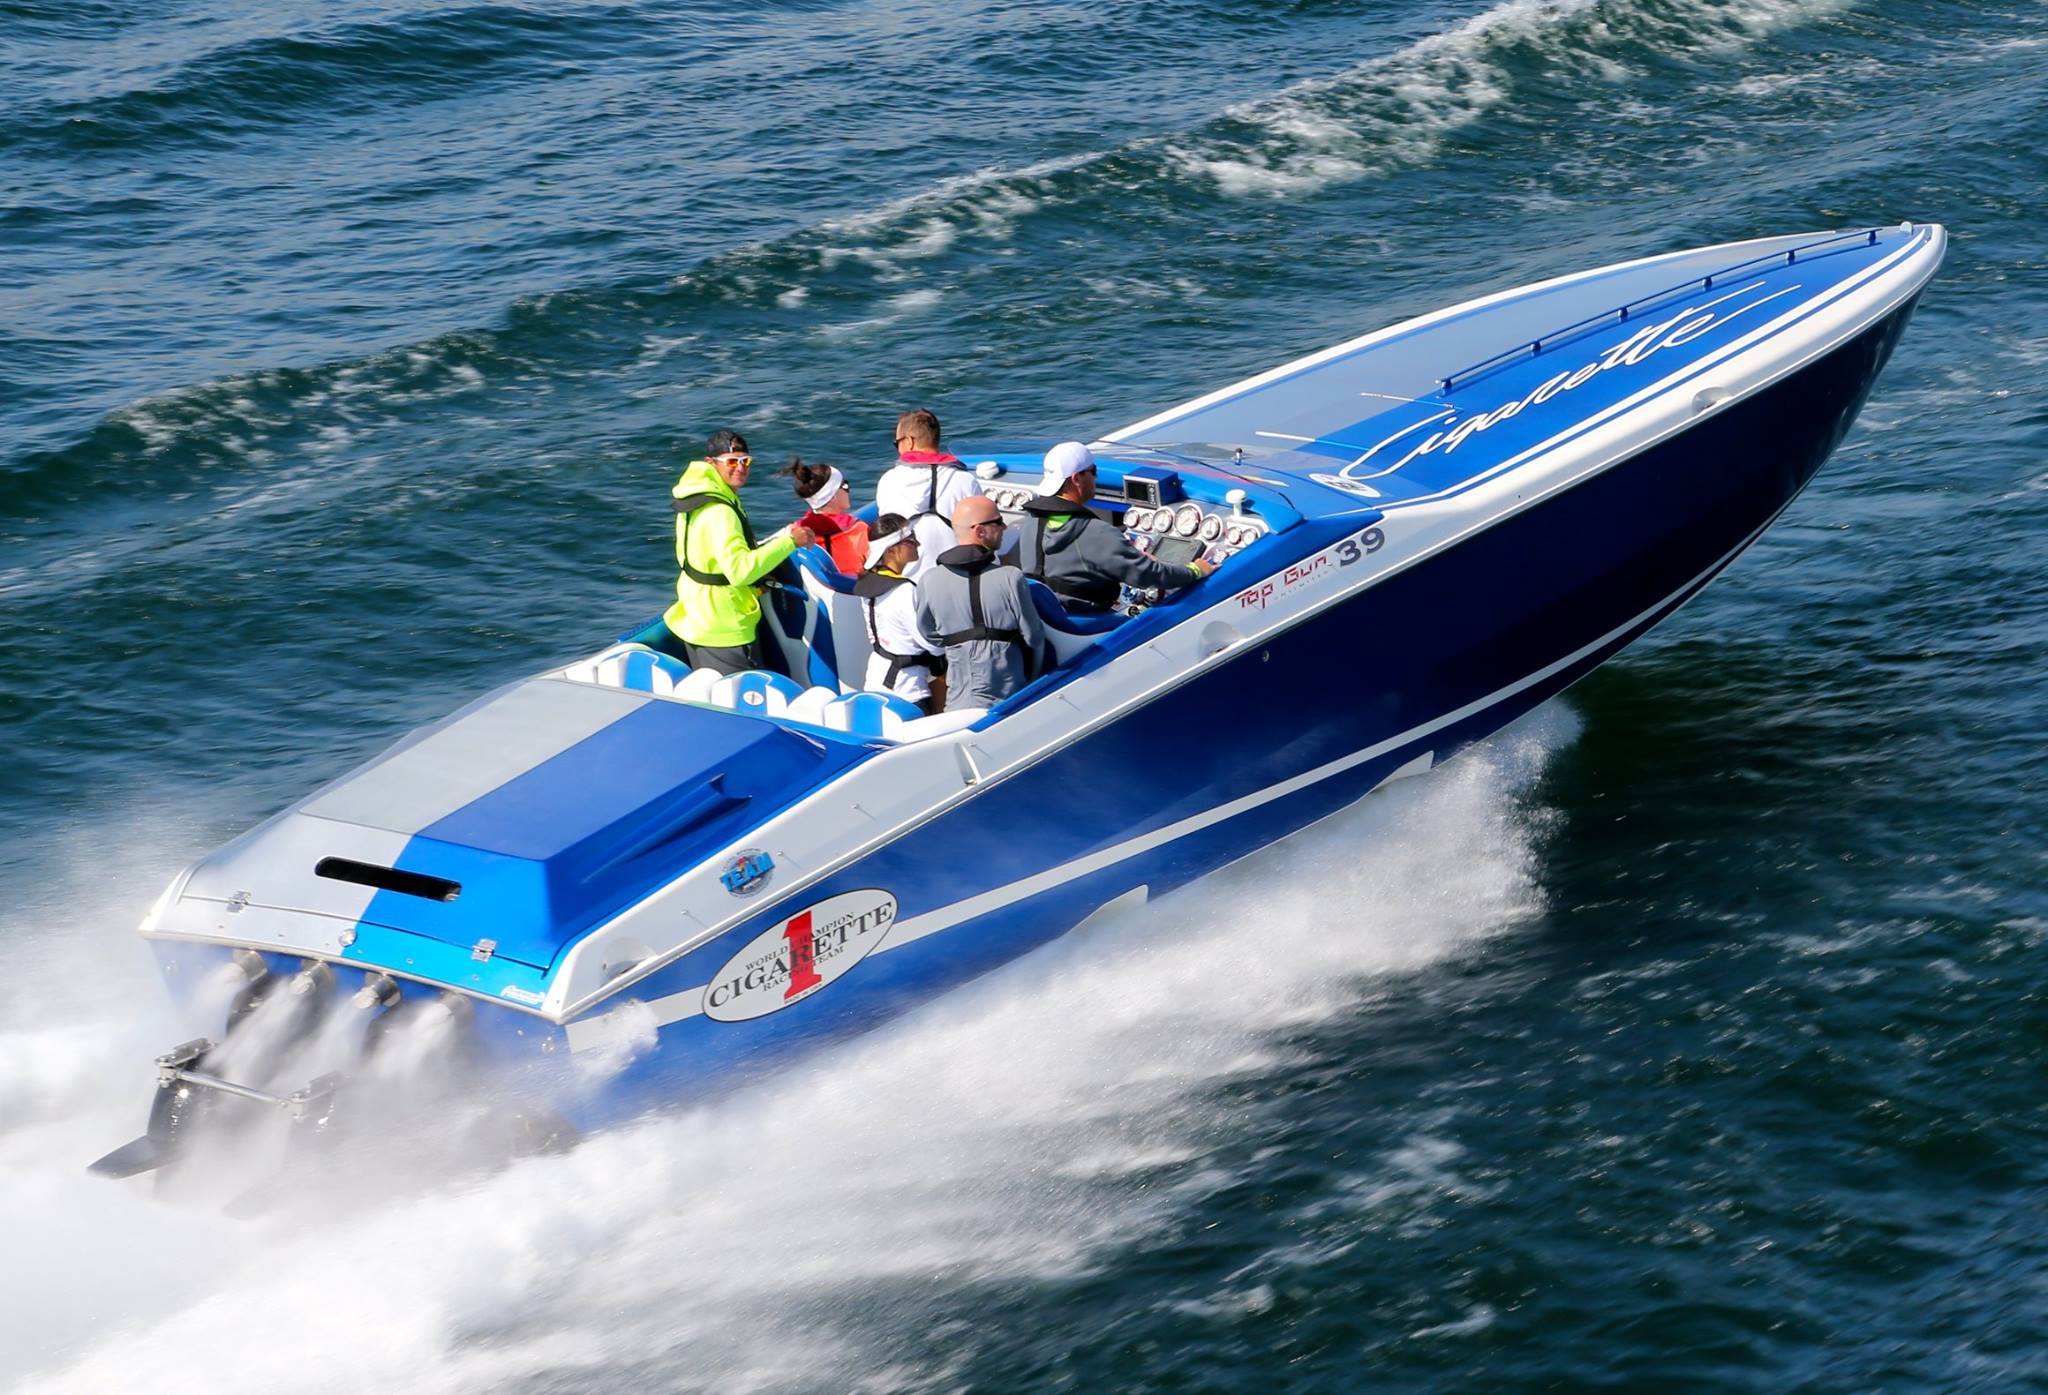 Top Go-Fast Boating Events for 2017 - boats.com